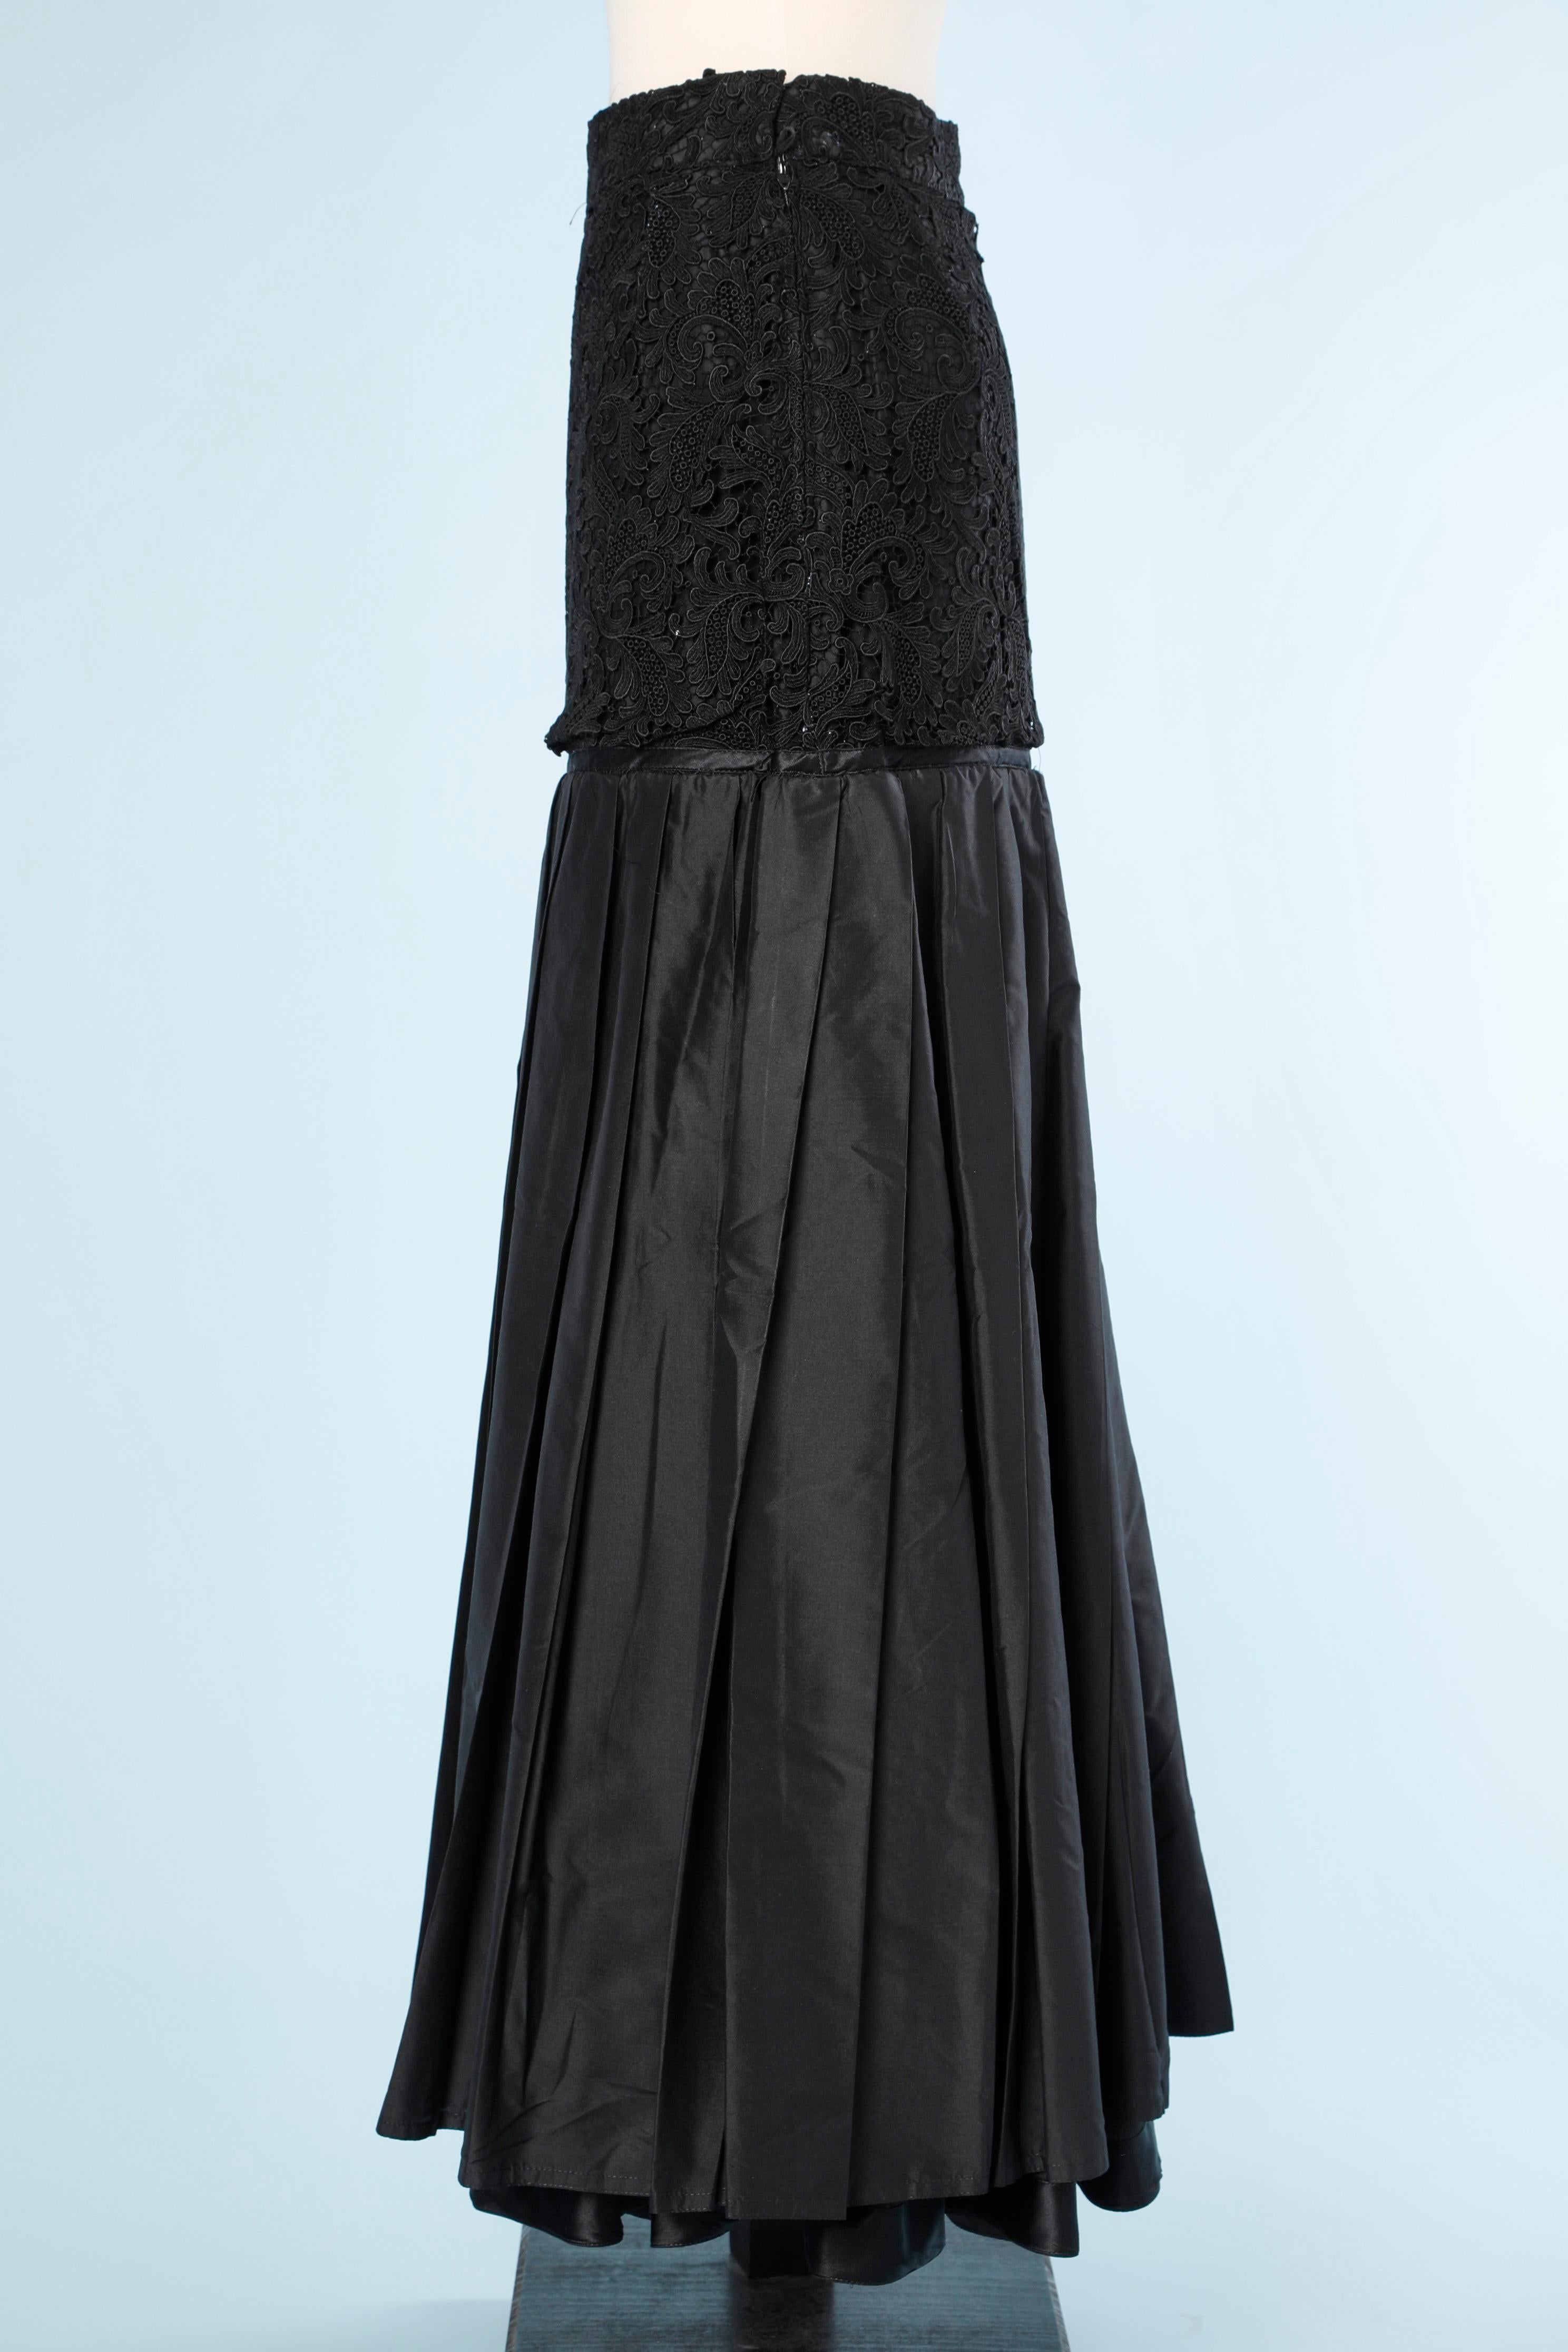 Black Long evening skirt in black lace and pleated taffetas Gianni Versace 